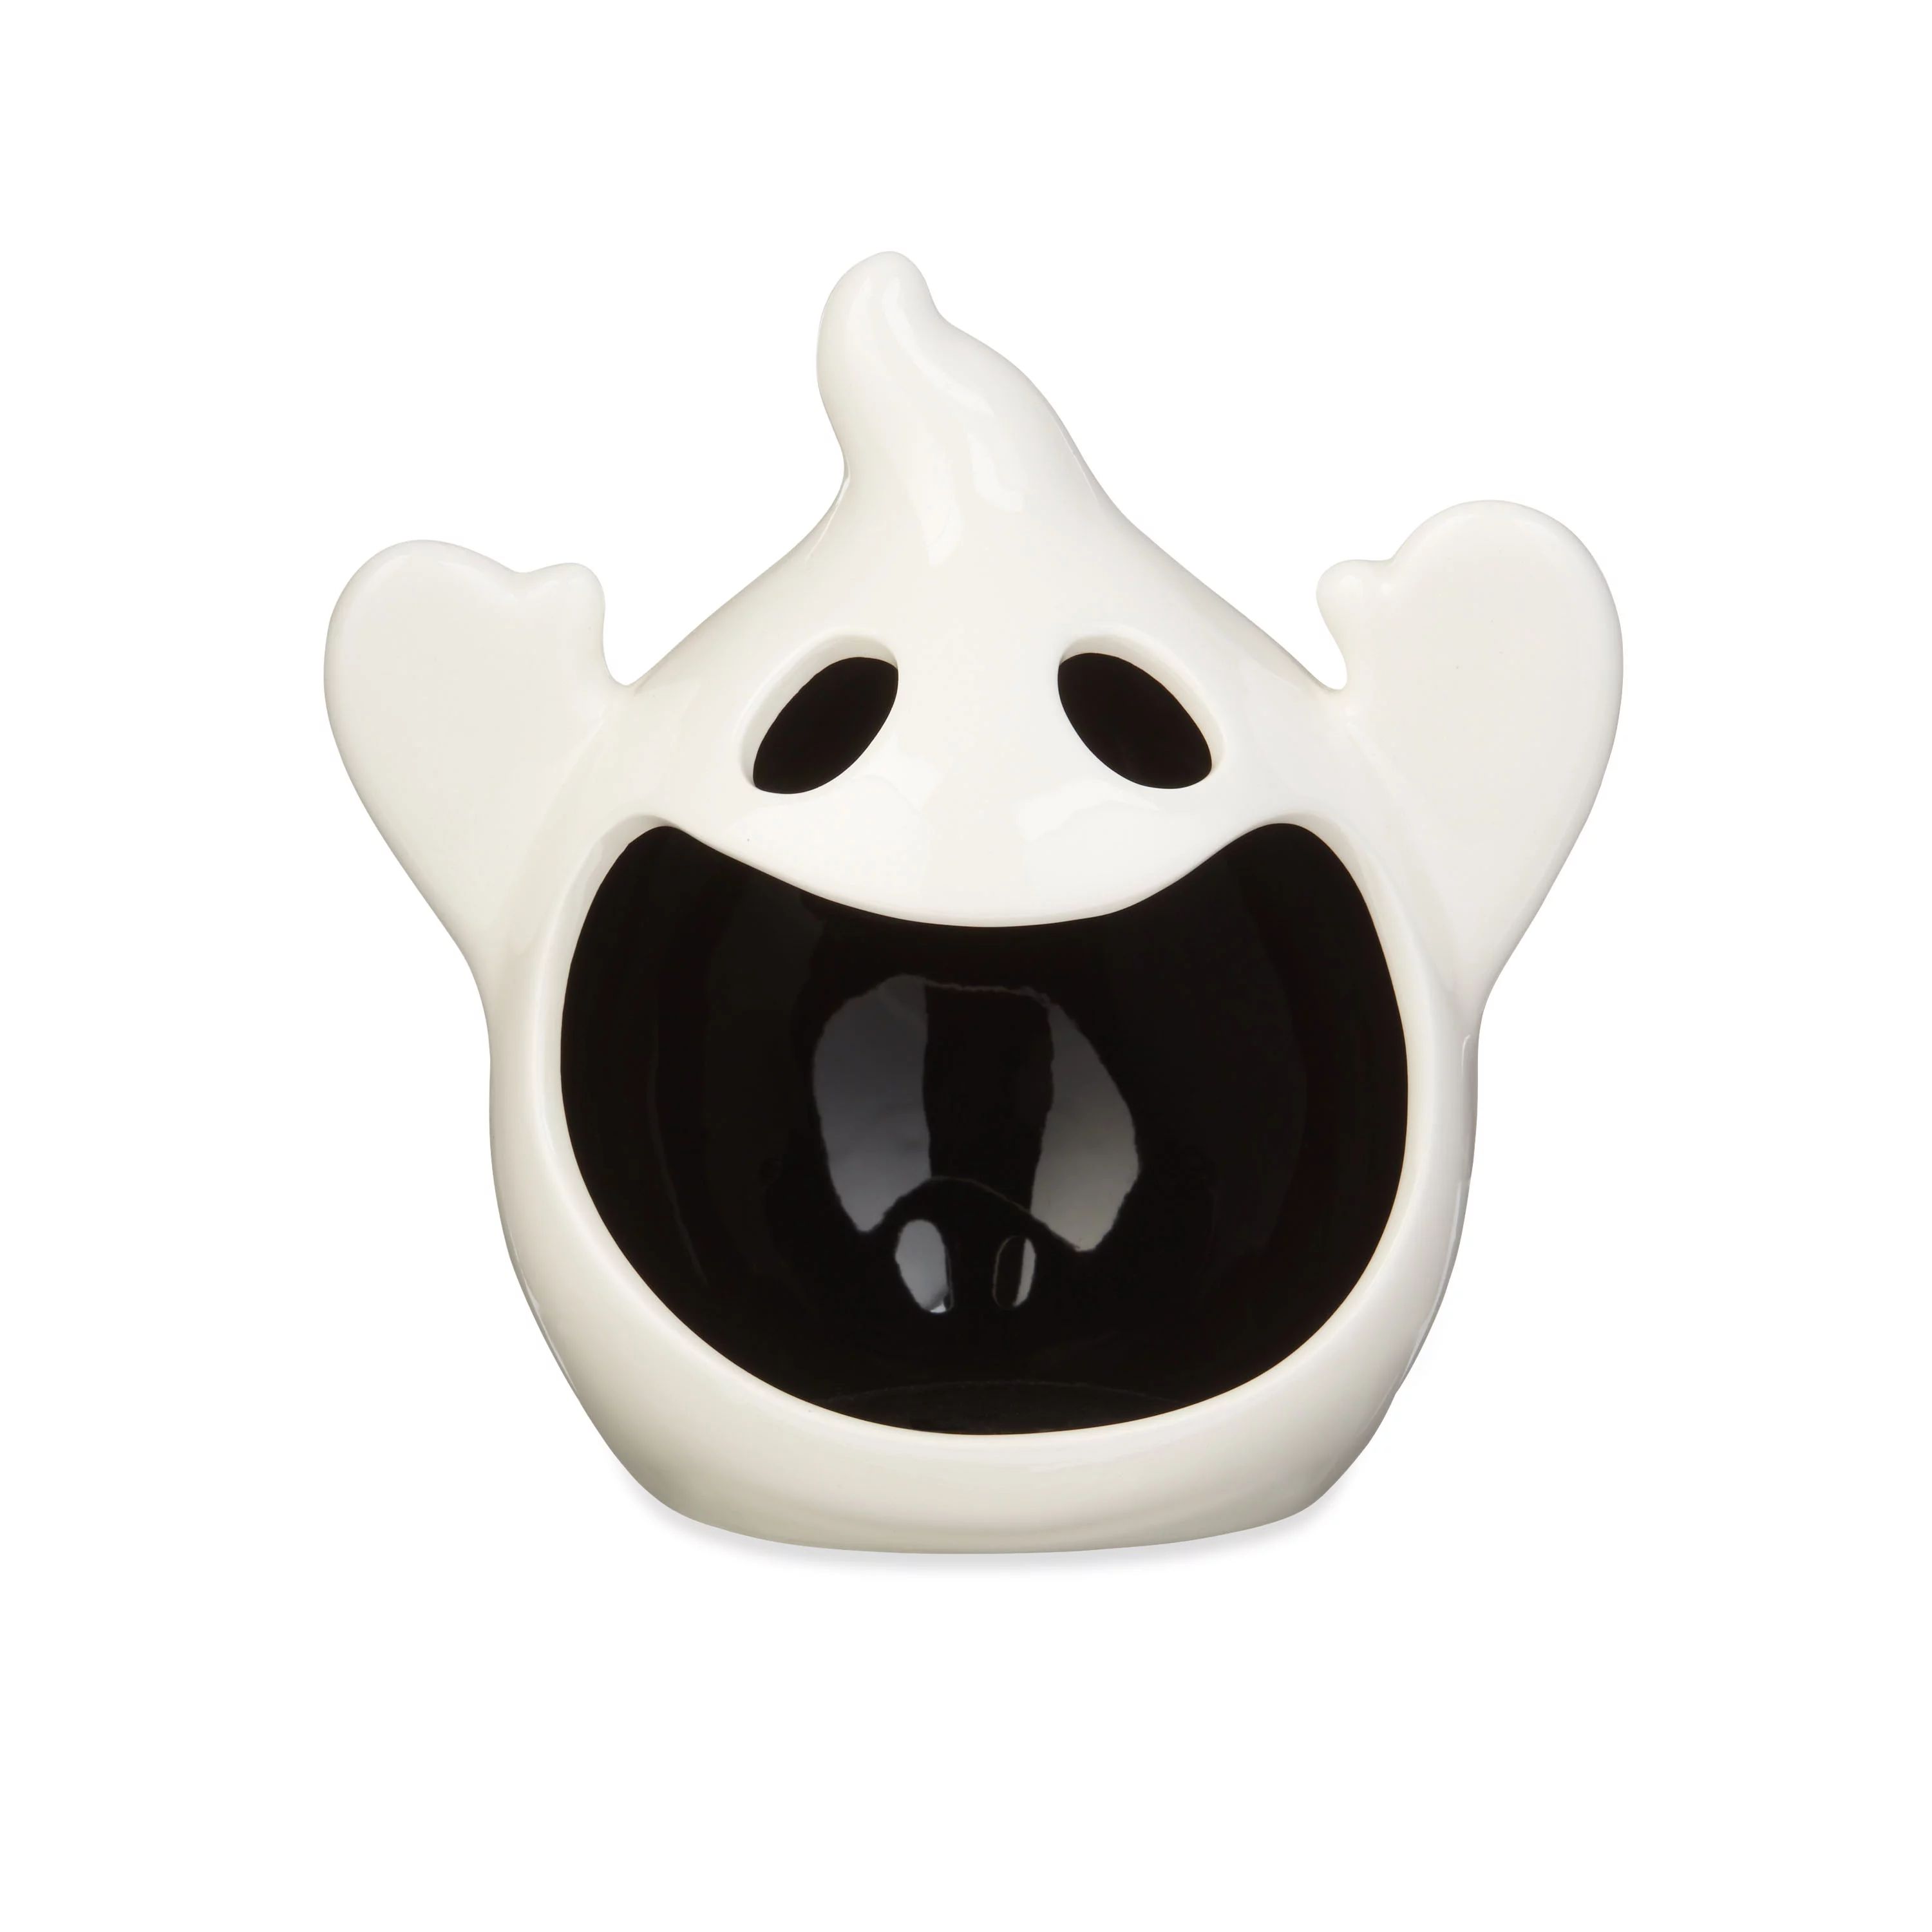 Way To Celebrate Halloween 5 Inch Ceramic White Ghost Candy Bowl Decoration | Walmart (US)